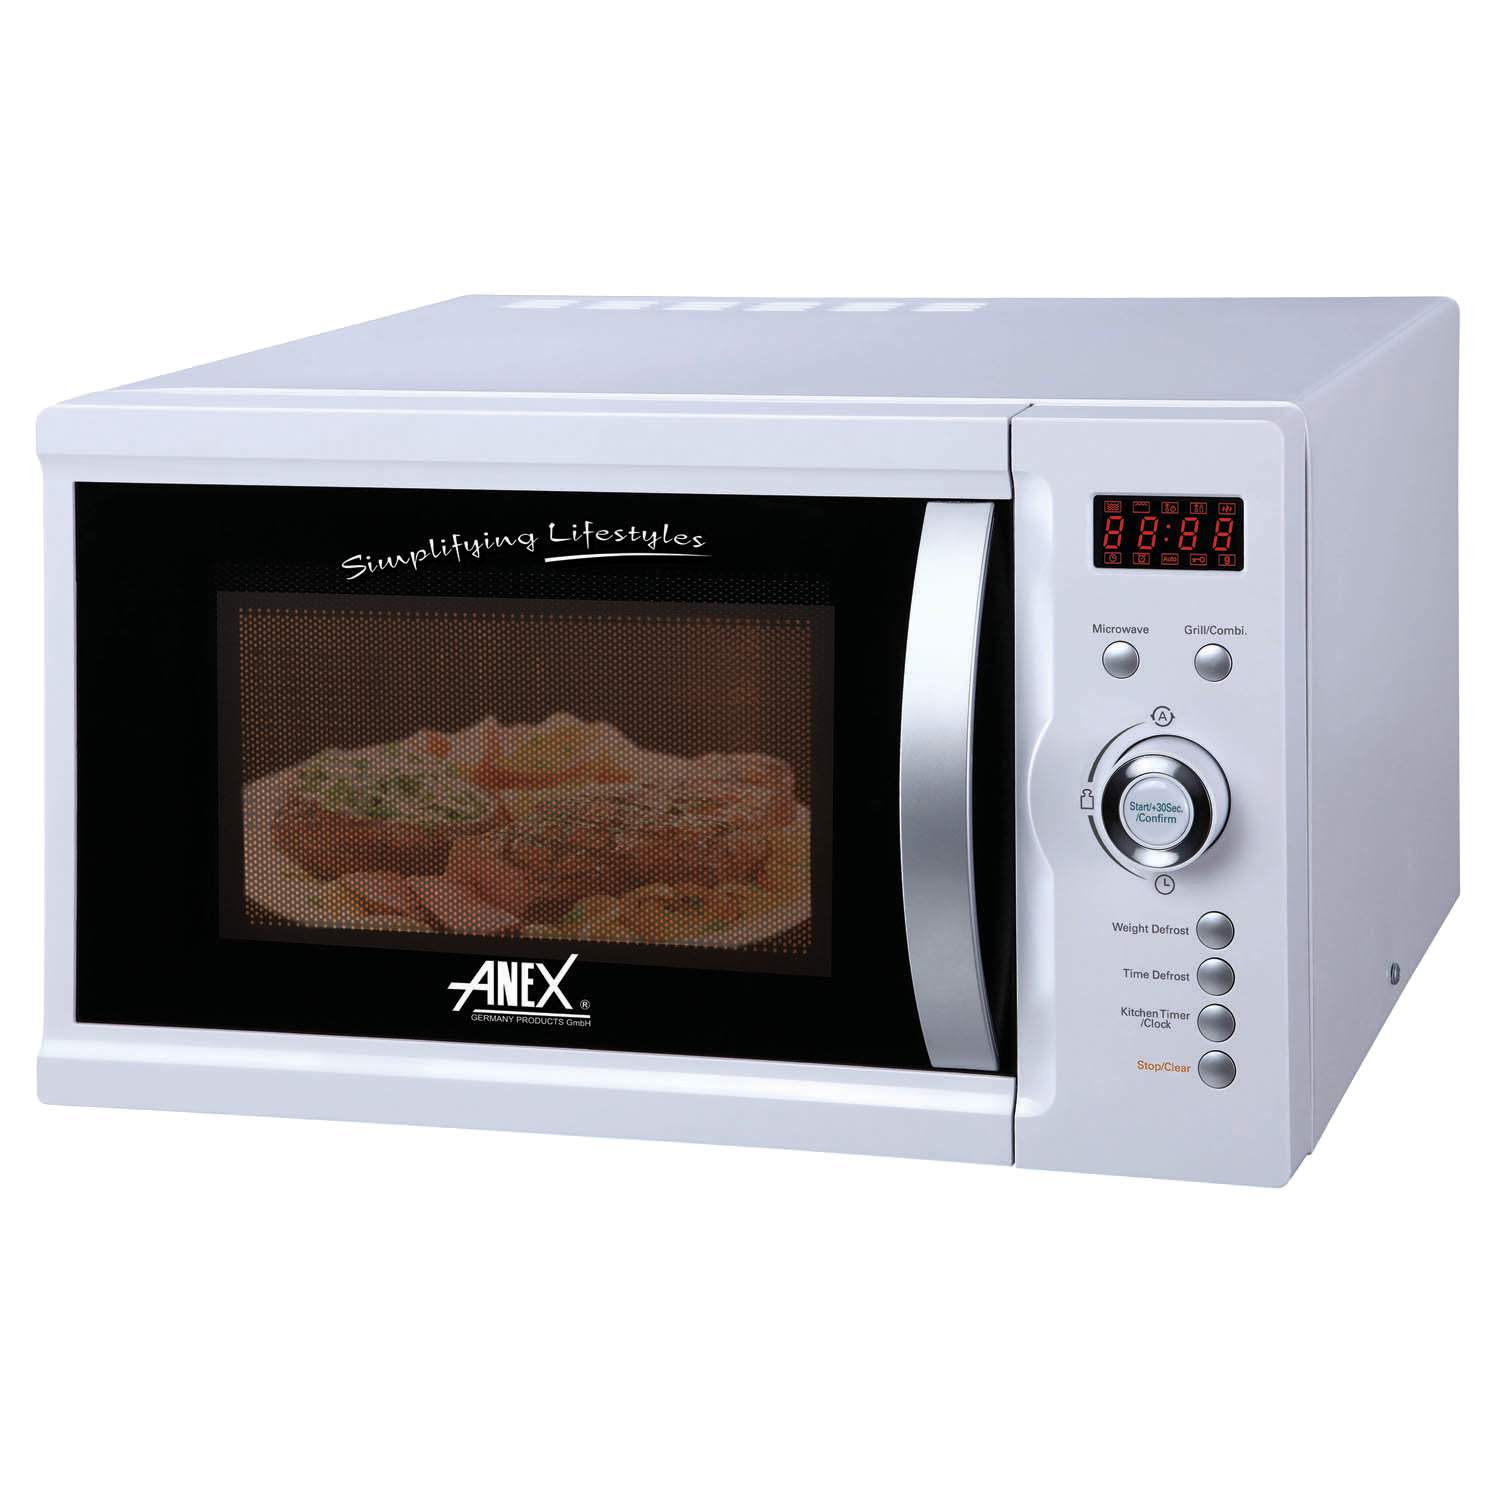 oven clipart oven timer